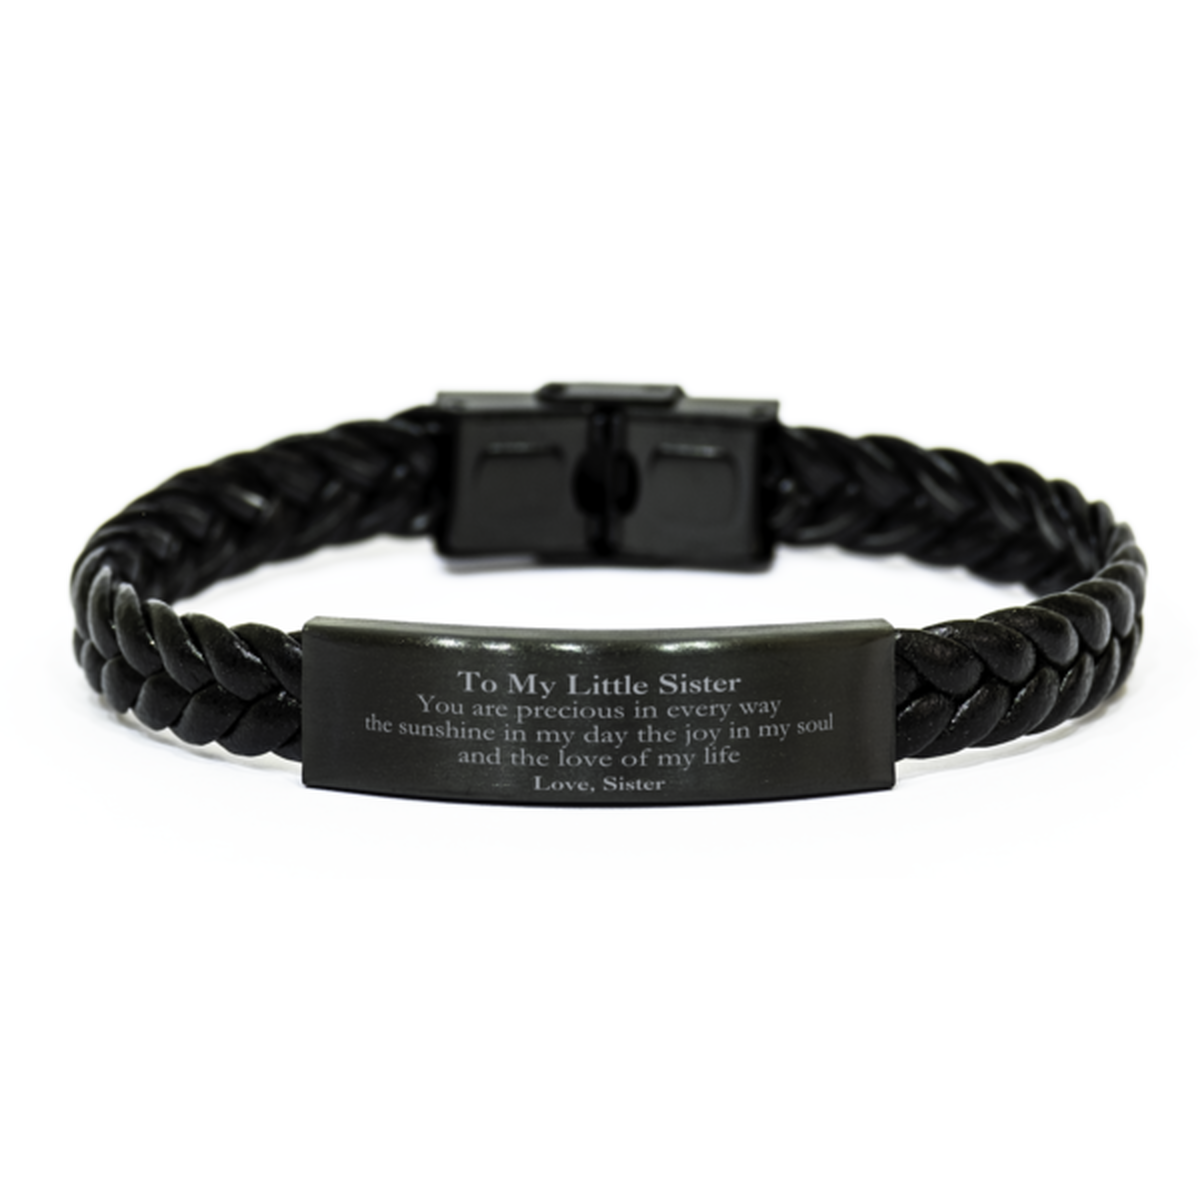 Graduation Gifts for Little Sister Braided Leather Bracelet Present from Sister, Christmas Little Sister Birthday Gifts Little Sister You are precious in every way the sunshine in my day. Love, Sister